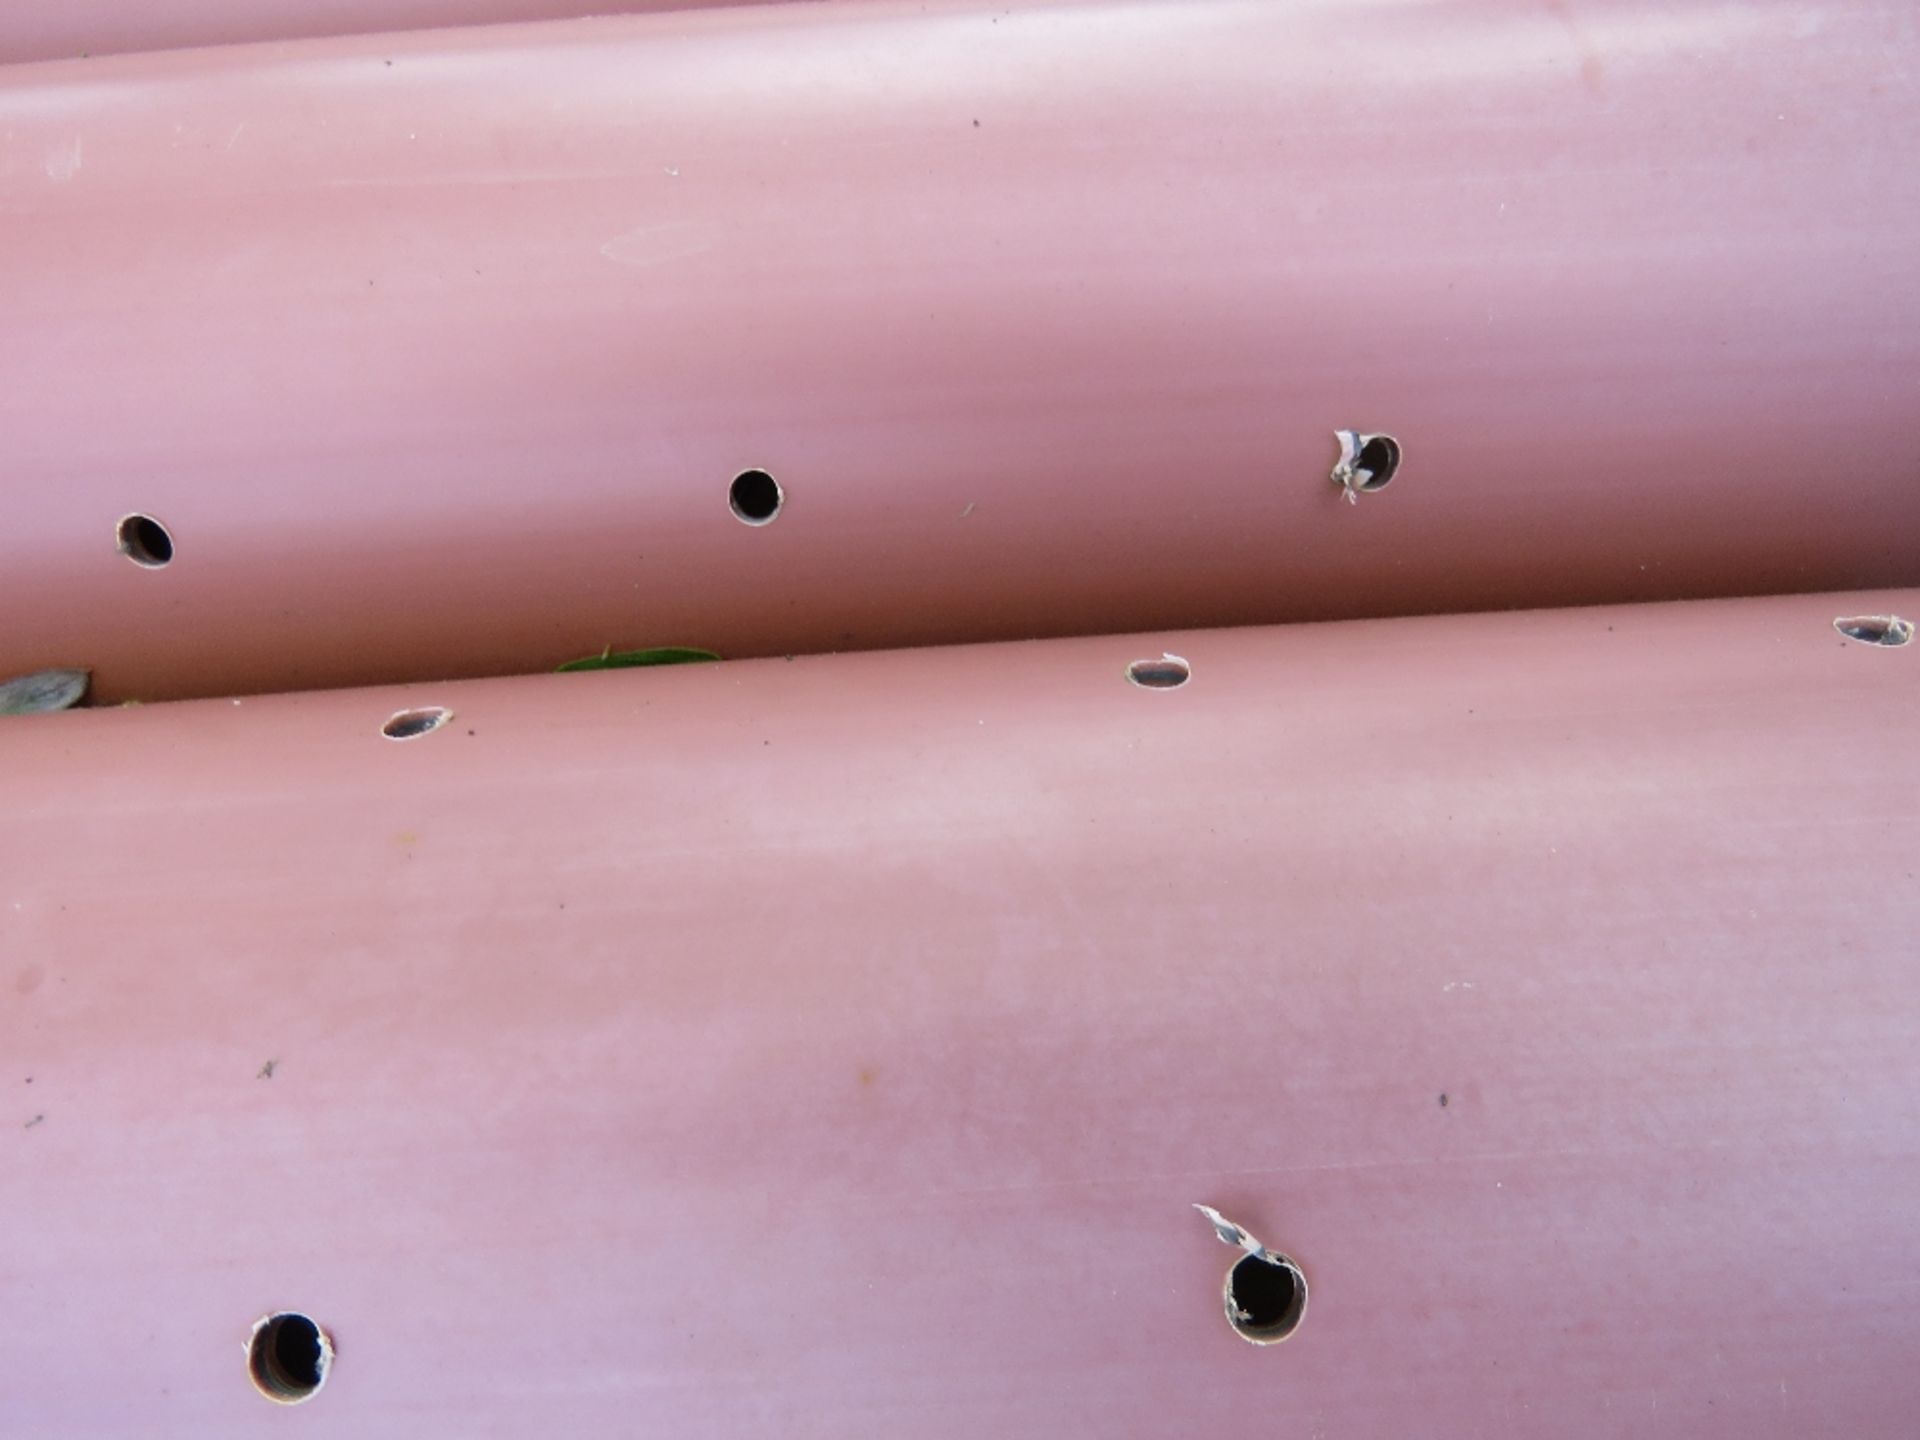 PACK OF POLYPIPE DRAINAGE PIPE WITH WEAPER HOLES 110MM PVC-U 6.05M LENGTH, 57NO LENGTHS IN TOTAL APP - Image 3 of 4